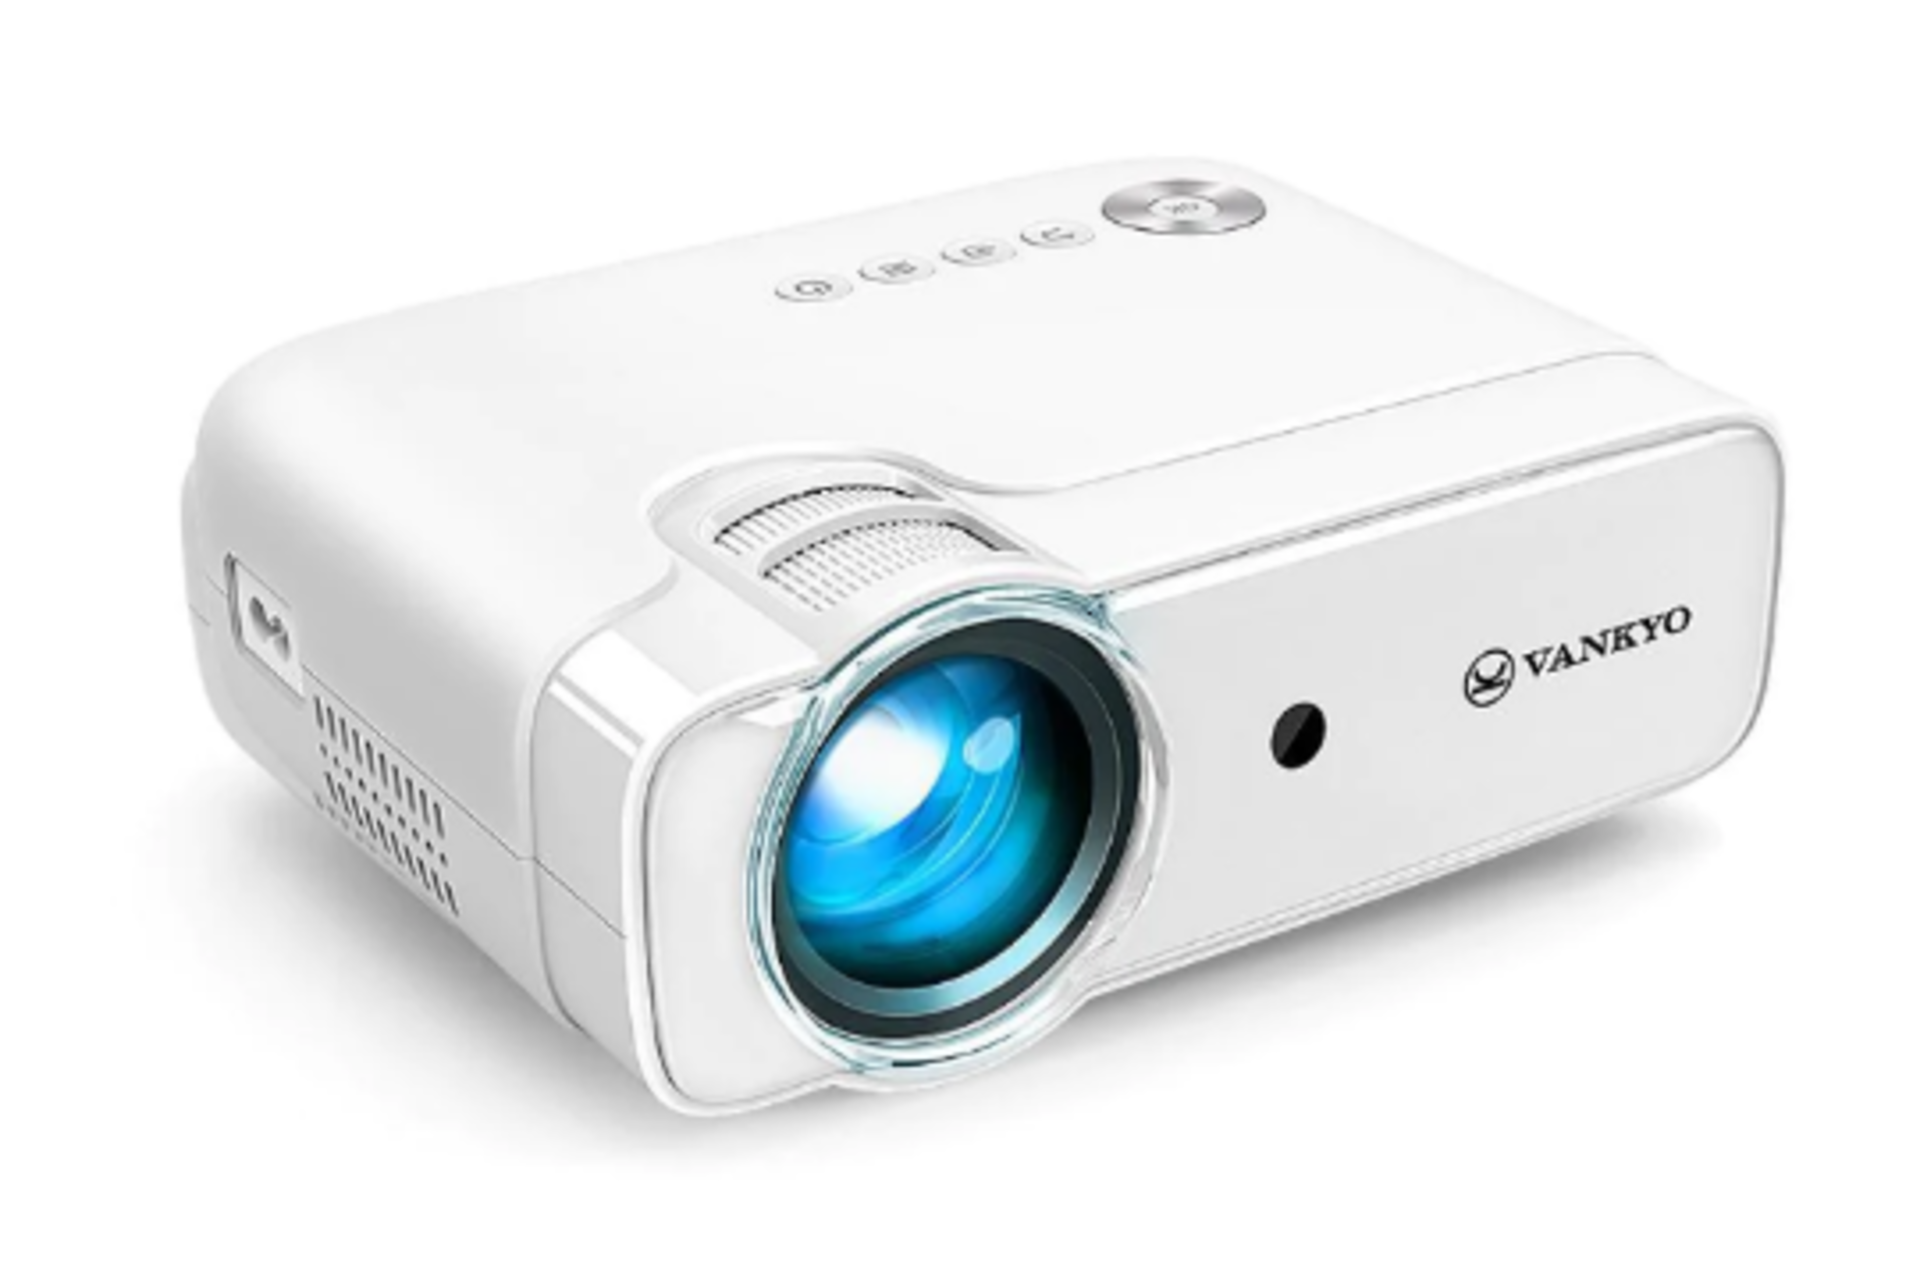 5 x New Boxed VANKYO Leisure 430 Mini Projector for Movie, Outdoor Entertainment, Native 720P.